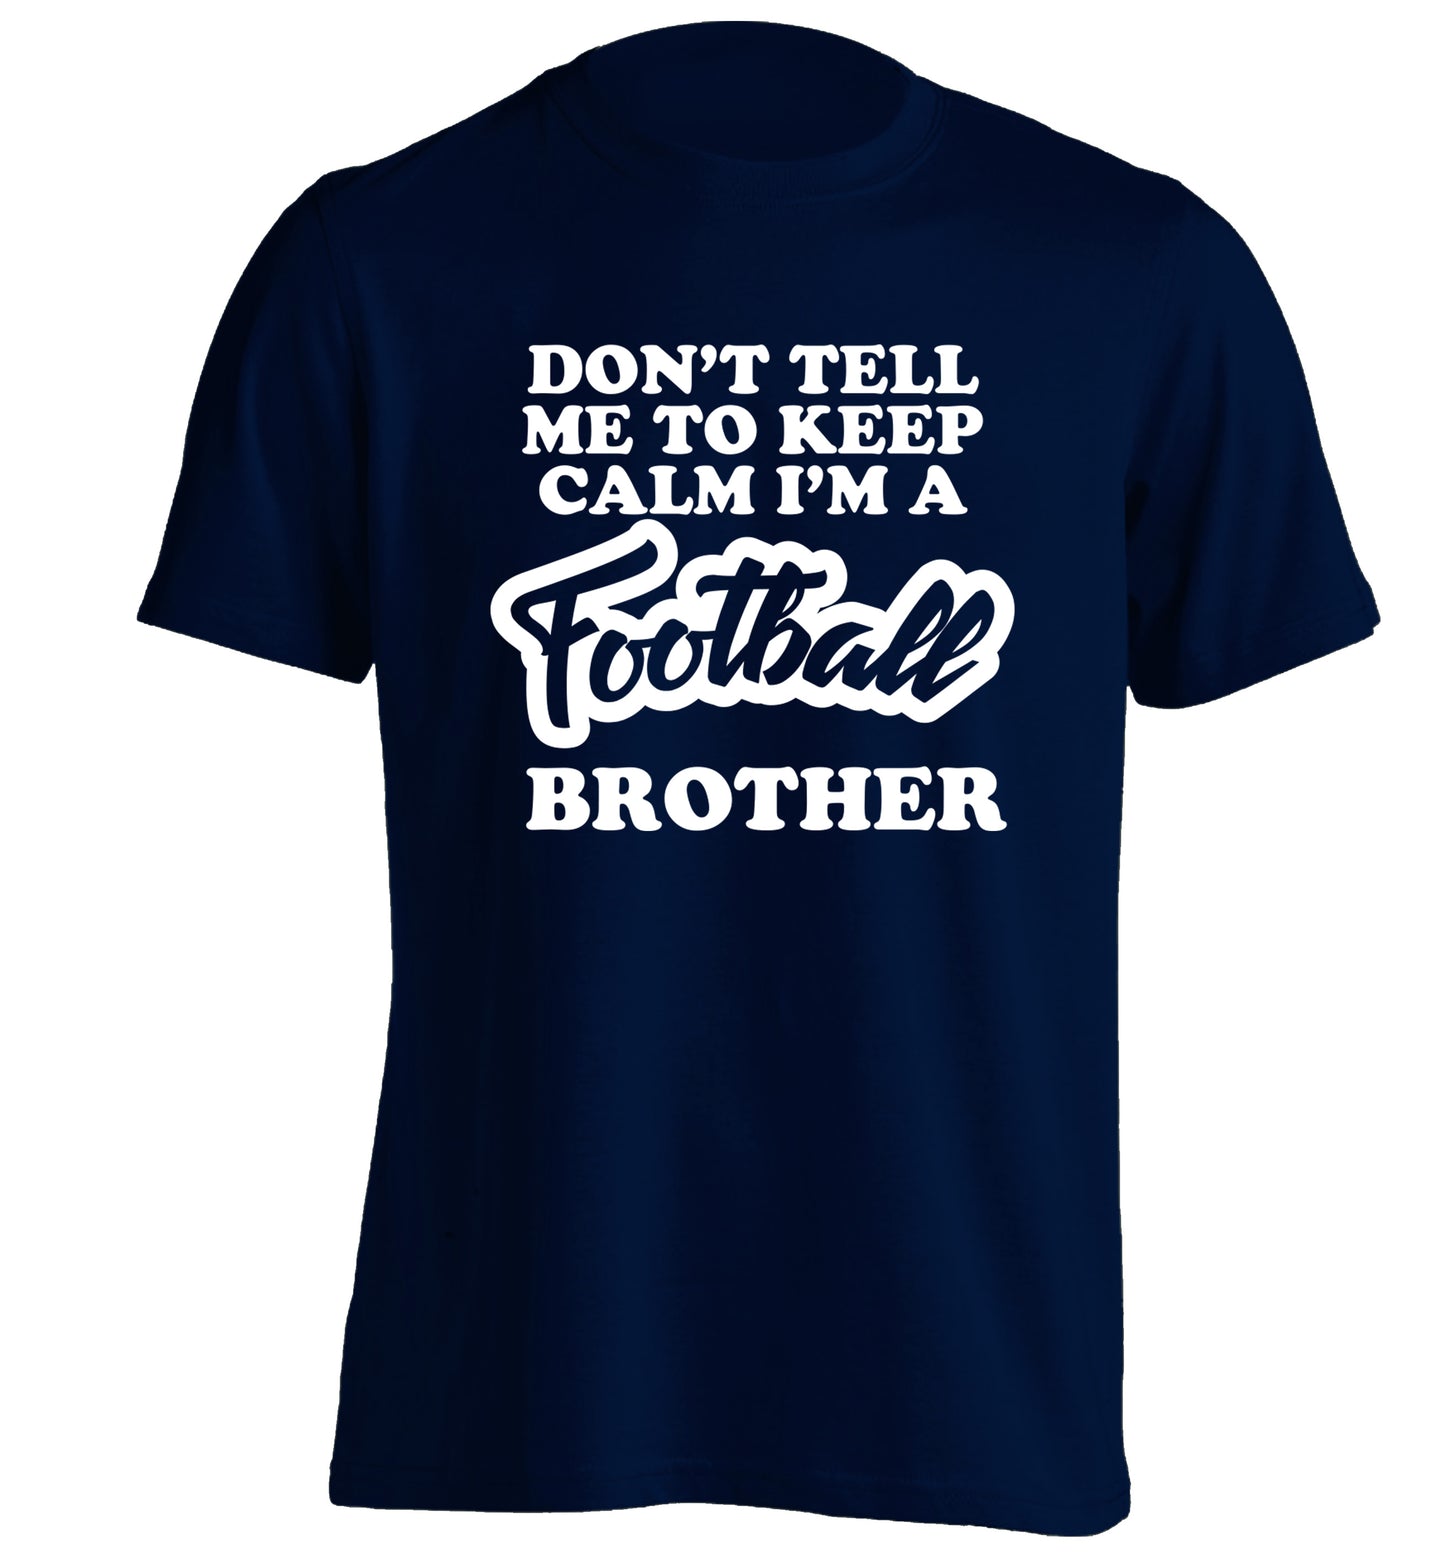 Don't tell me to keep calm I'm a football brother adults unisexnavy Tshirt 2XL